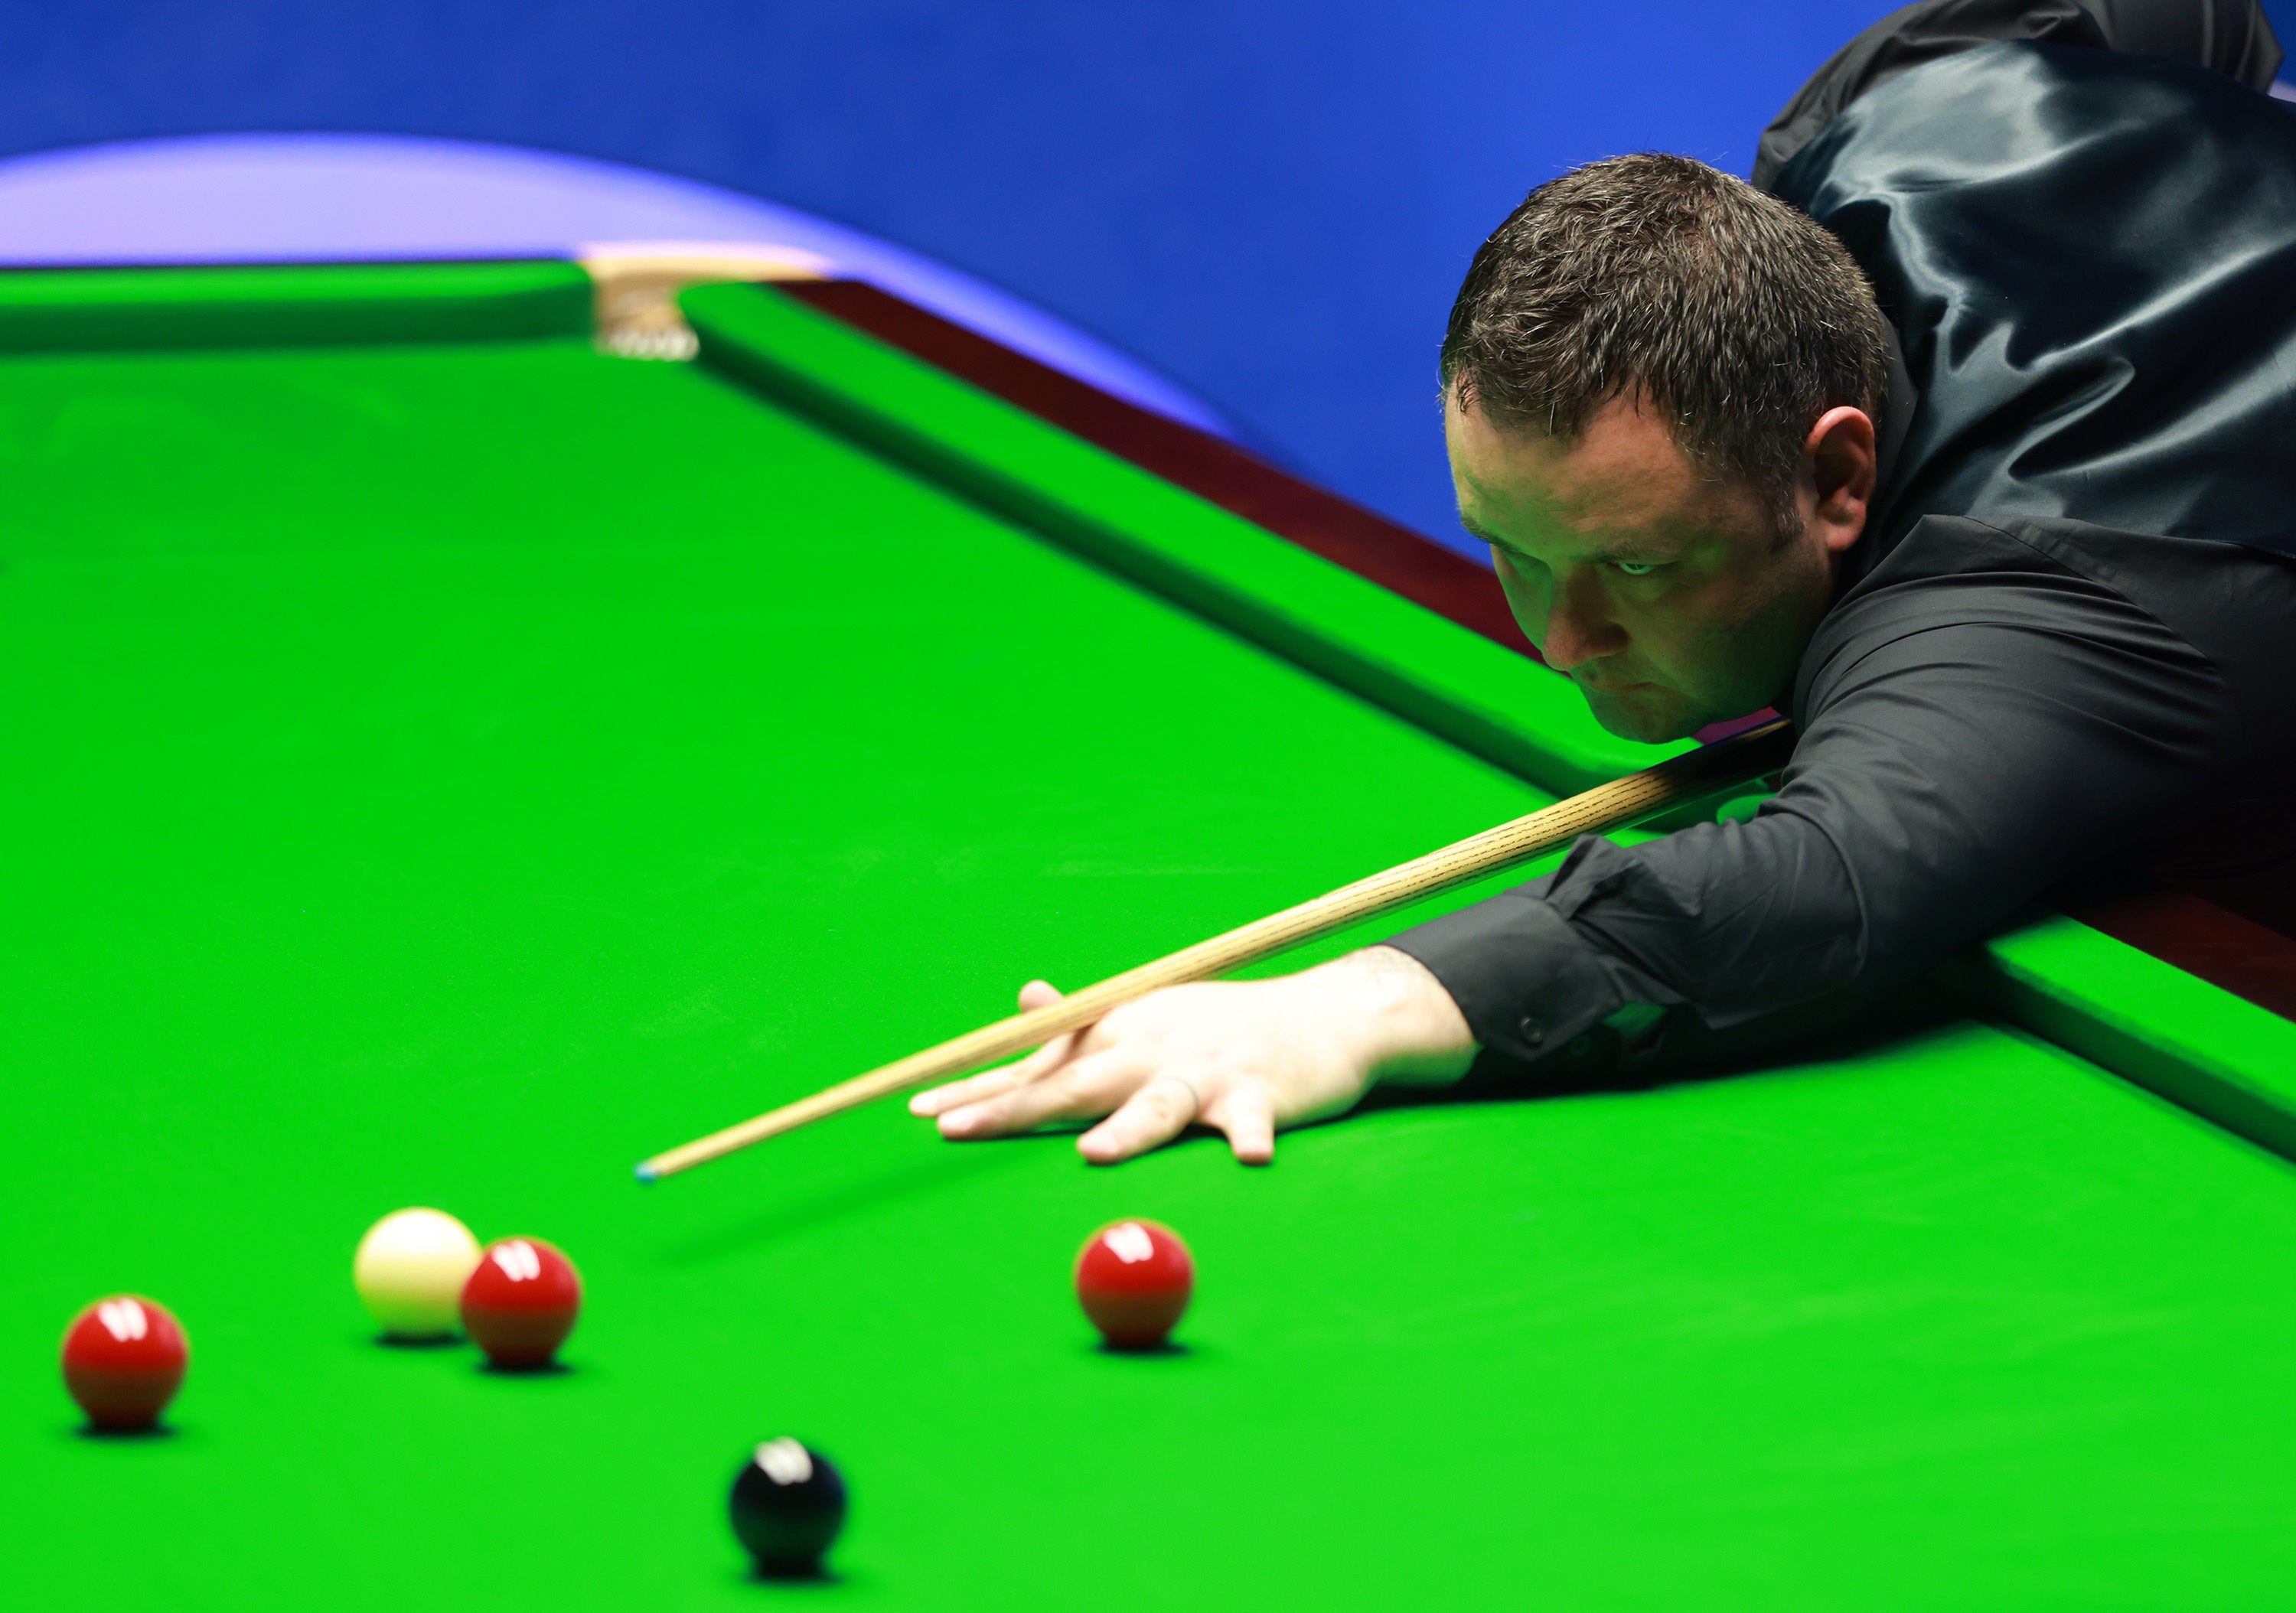 Stephen Maguire saw off Zhao Xintong in Sheffield (Ian Hodgson/PA)